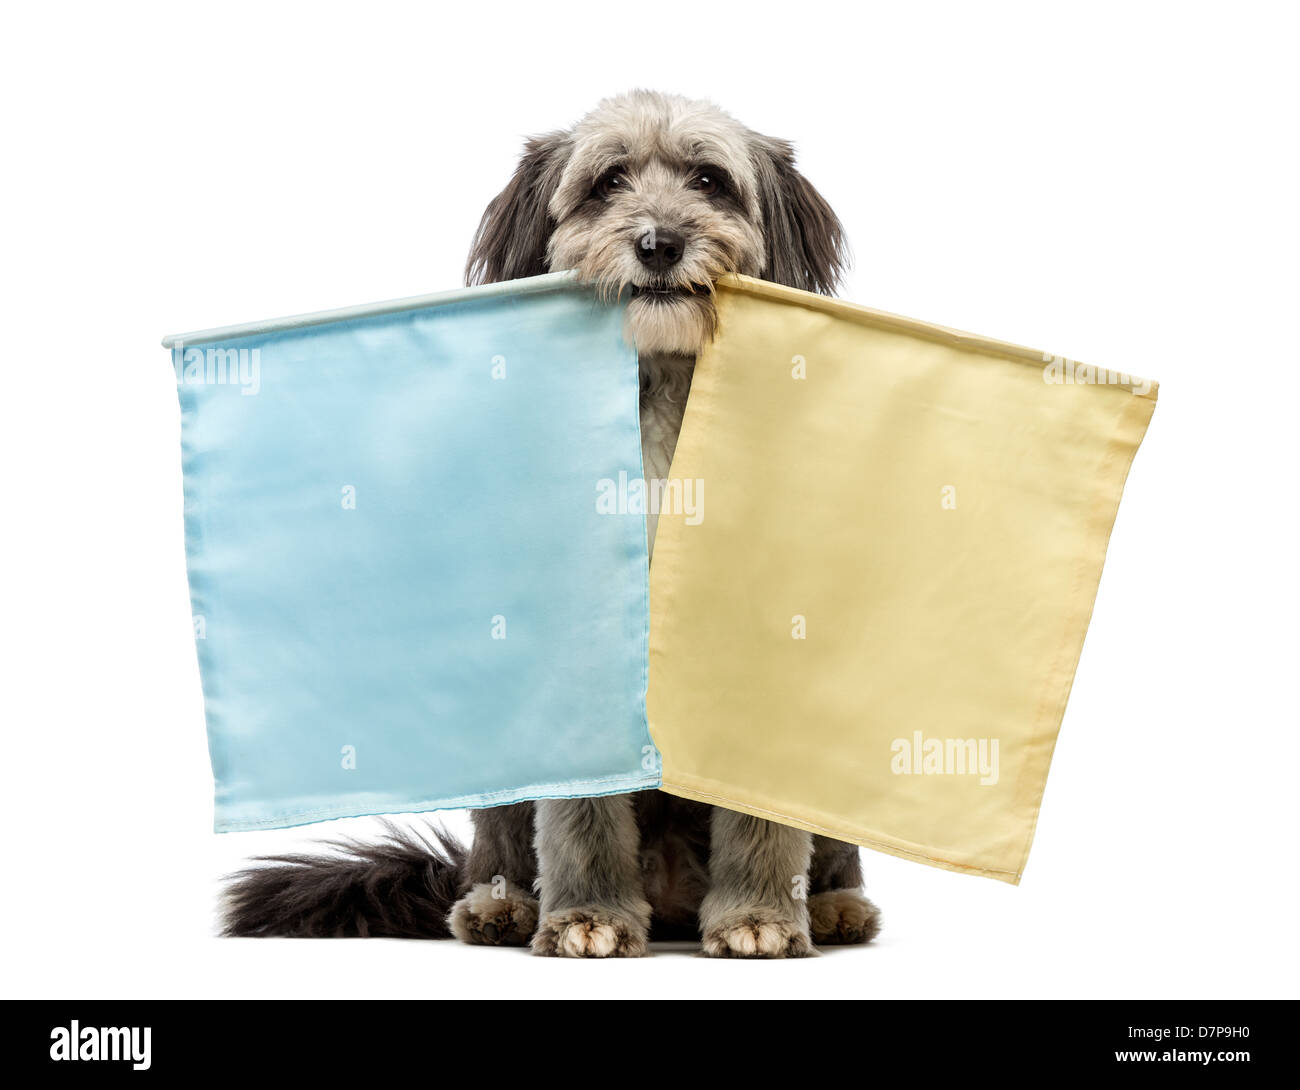 Crossbreed dog, 4 years old, holding two flags against white background Stock Photo